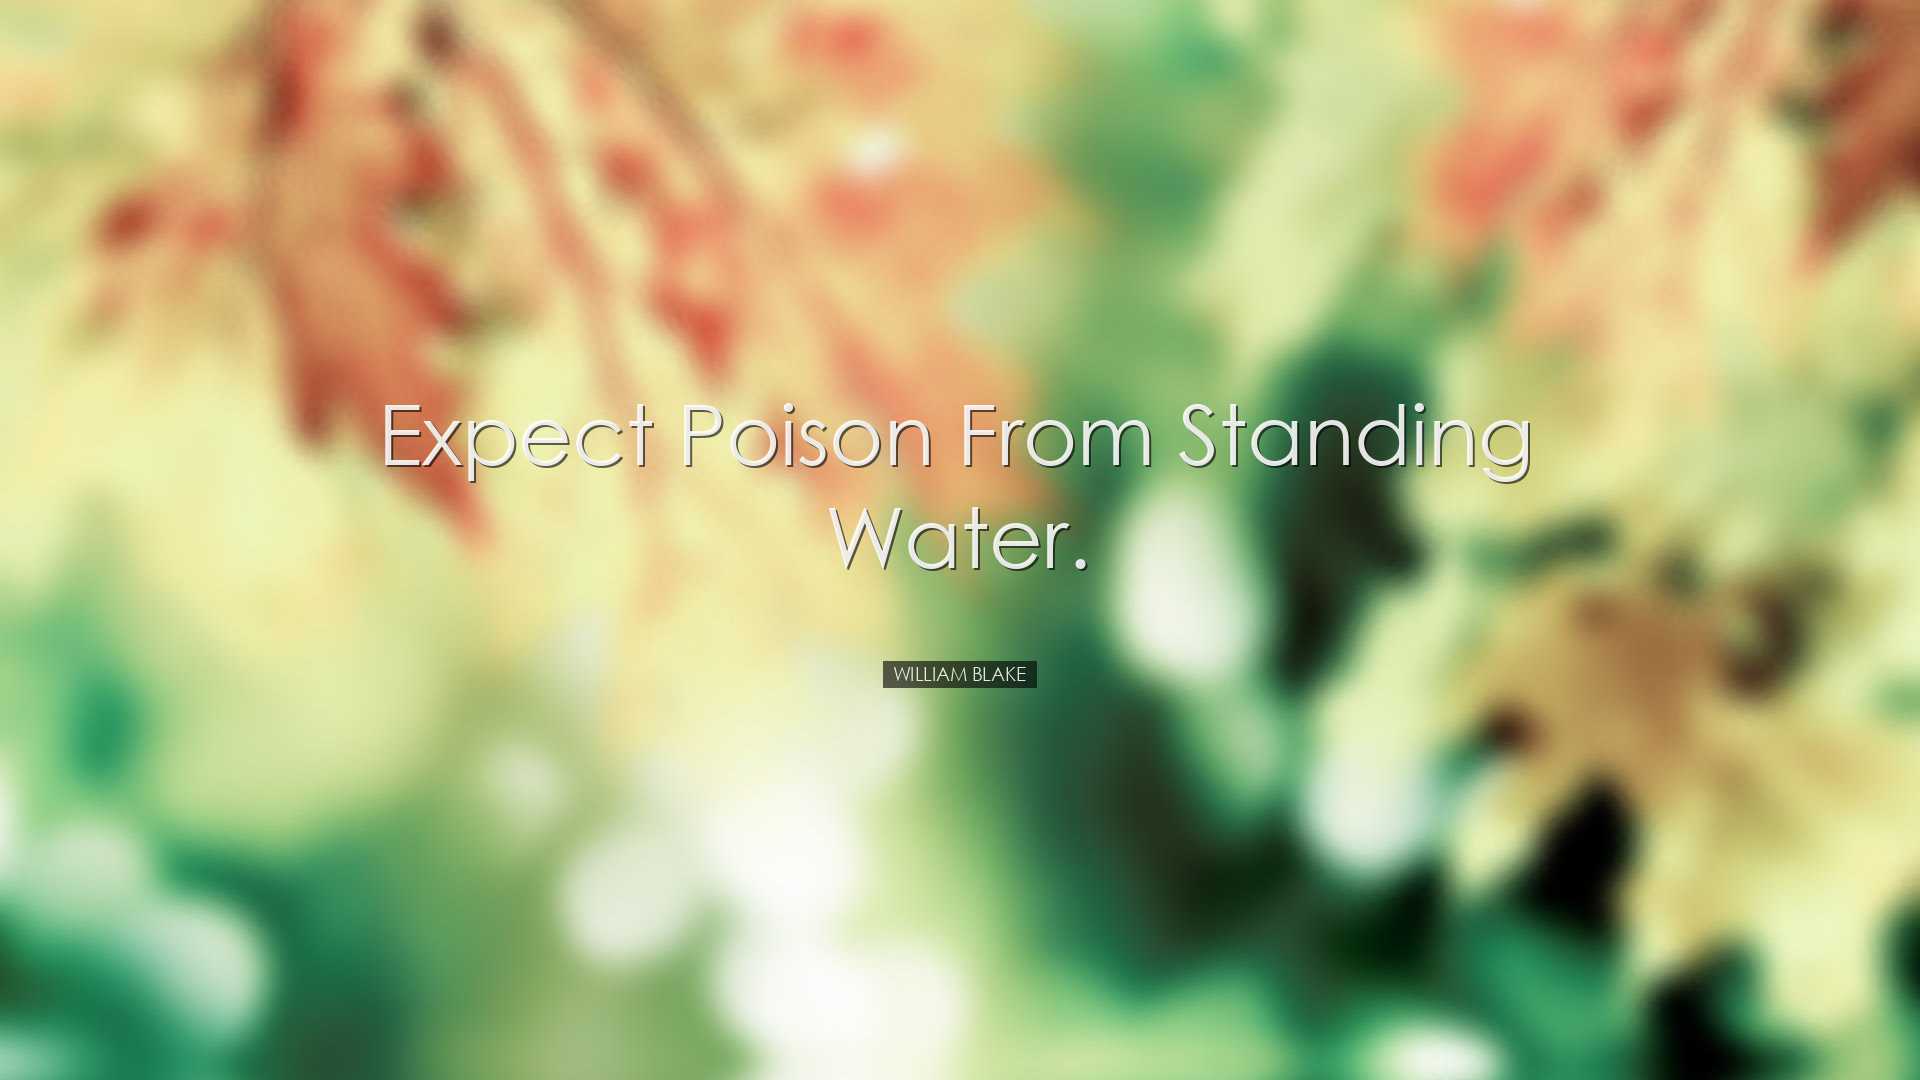 Expect poison from standing water. - William Blake